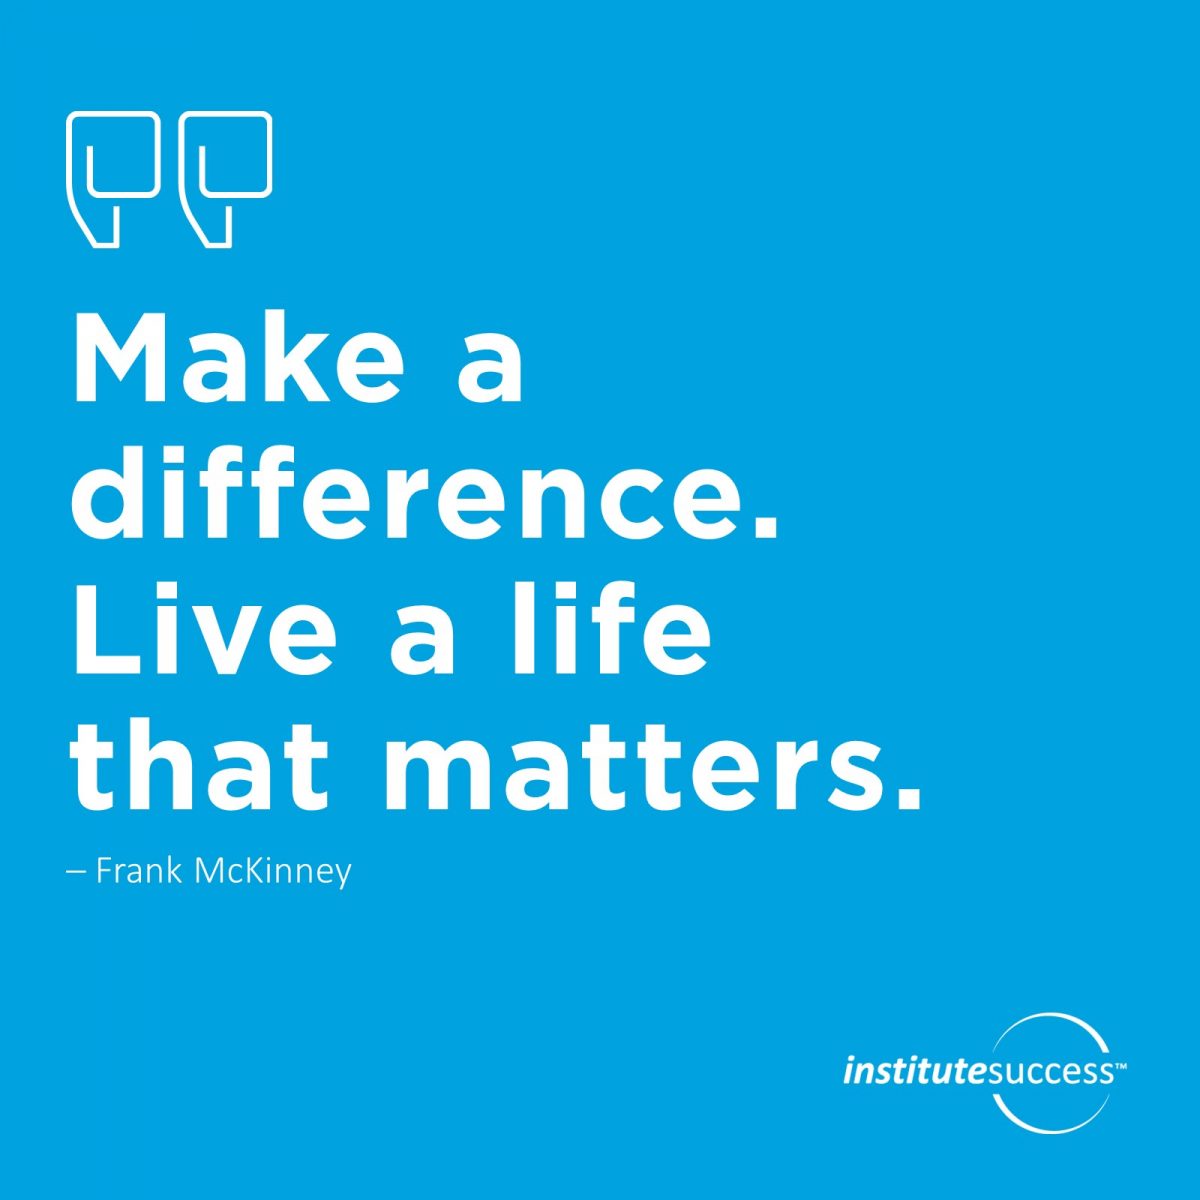 Make a difference. Live a life that matters. Frank McKinney